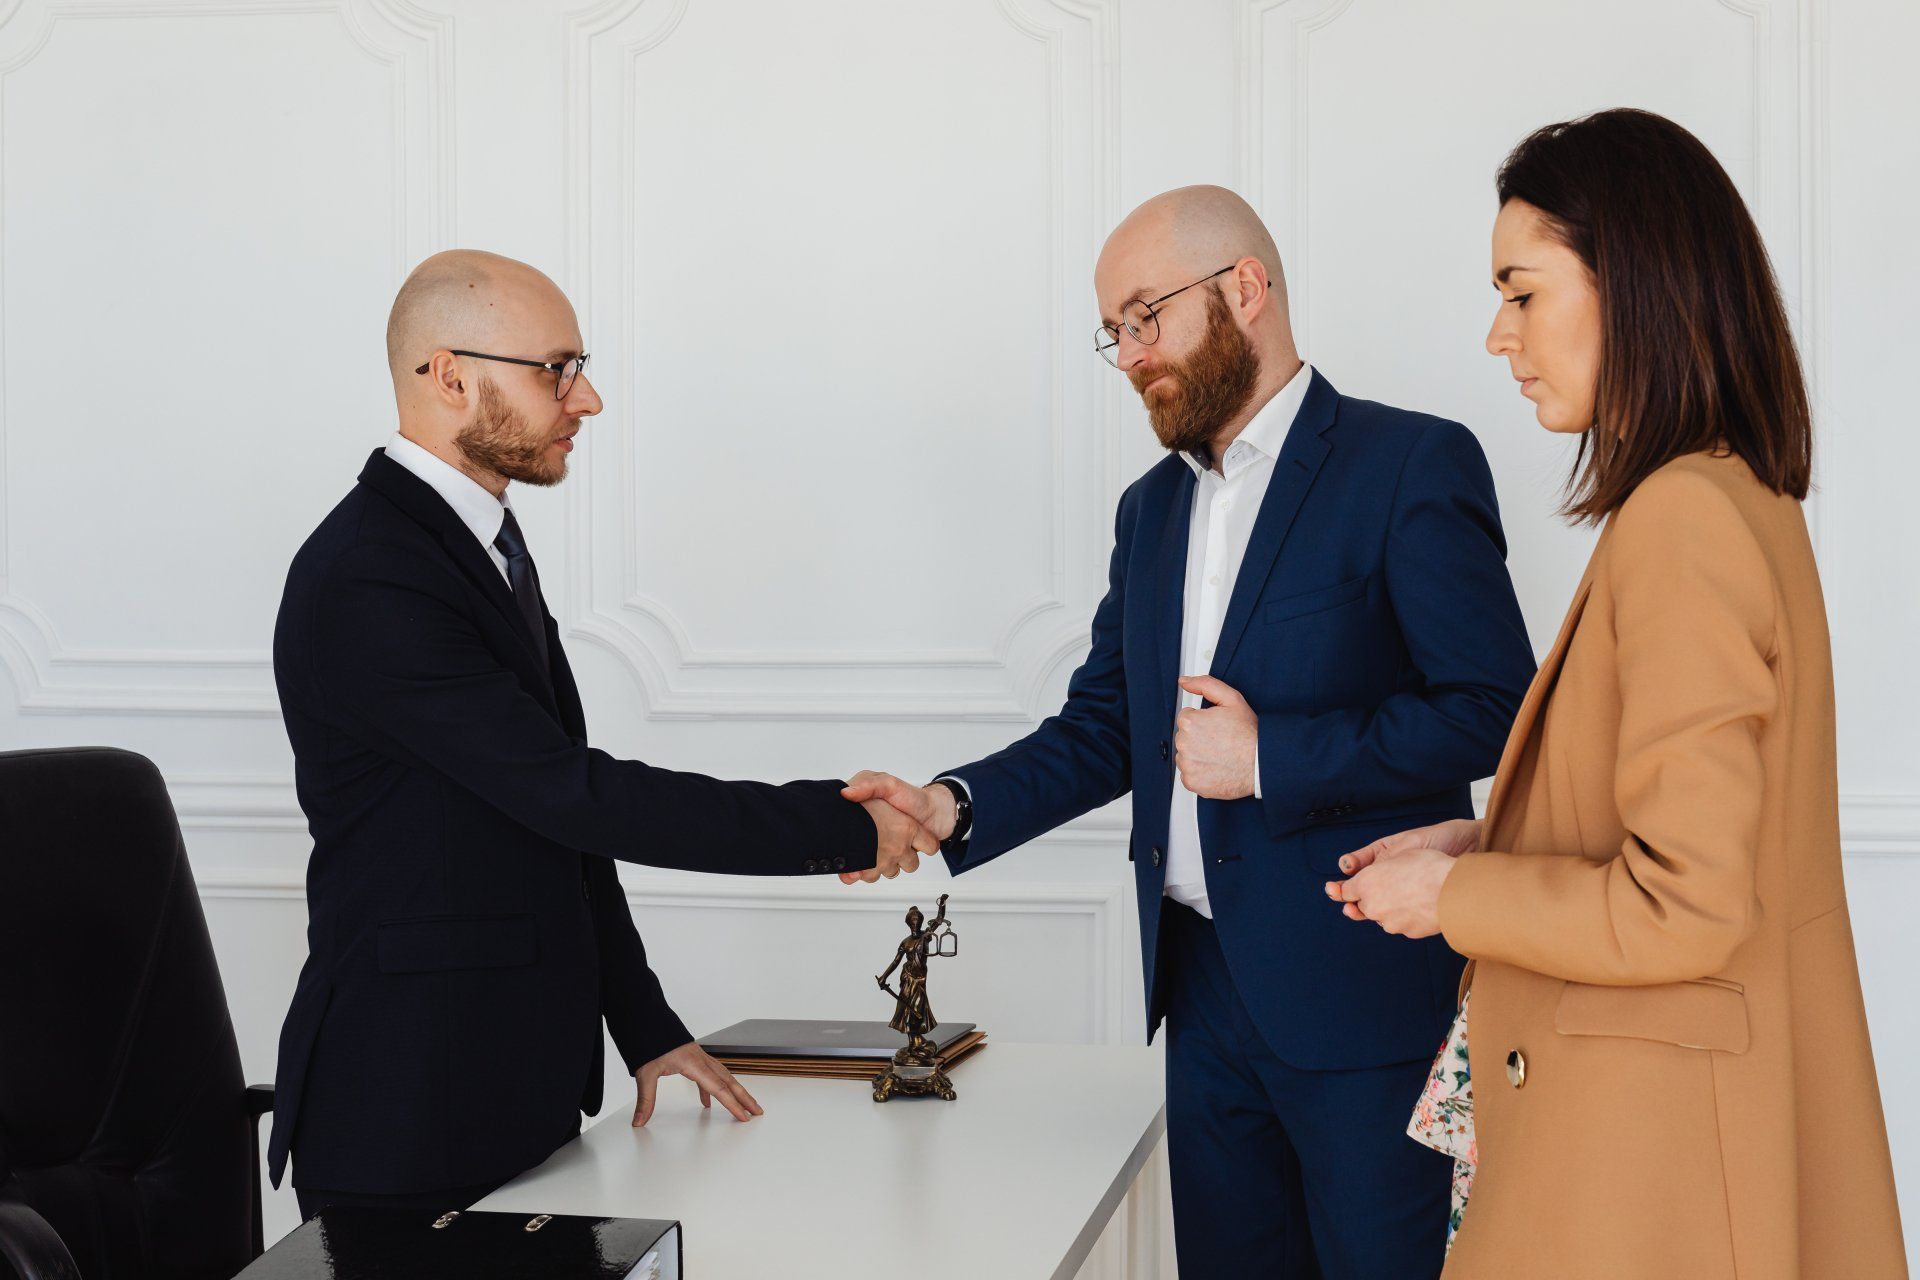 A man and a woman are shaking hands with a lawyer in an office.